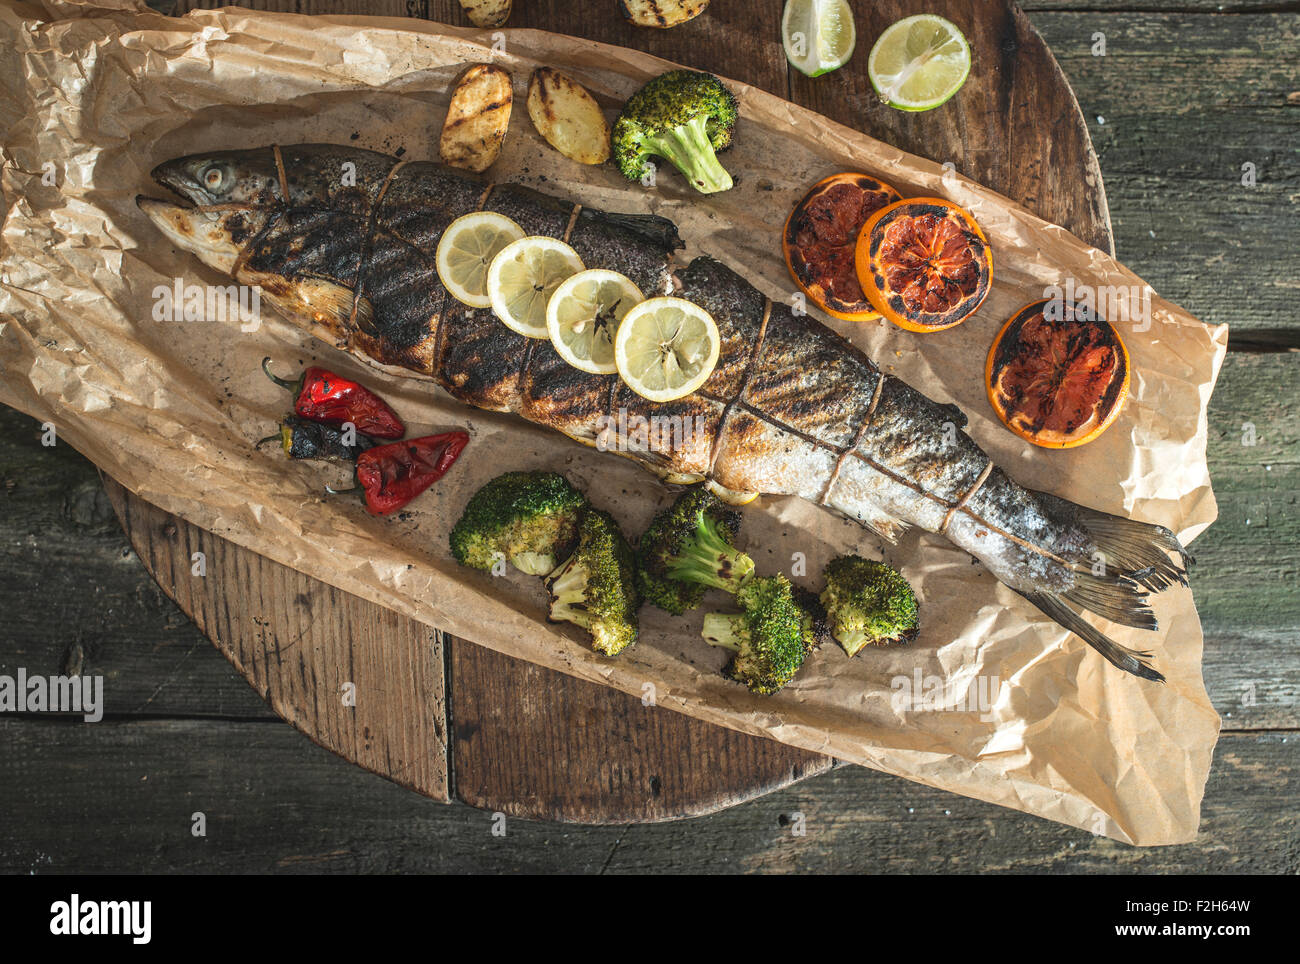 Roasted salmon and vegetables on vintage wooden table Stock Photo